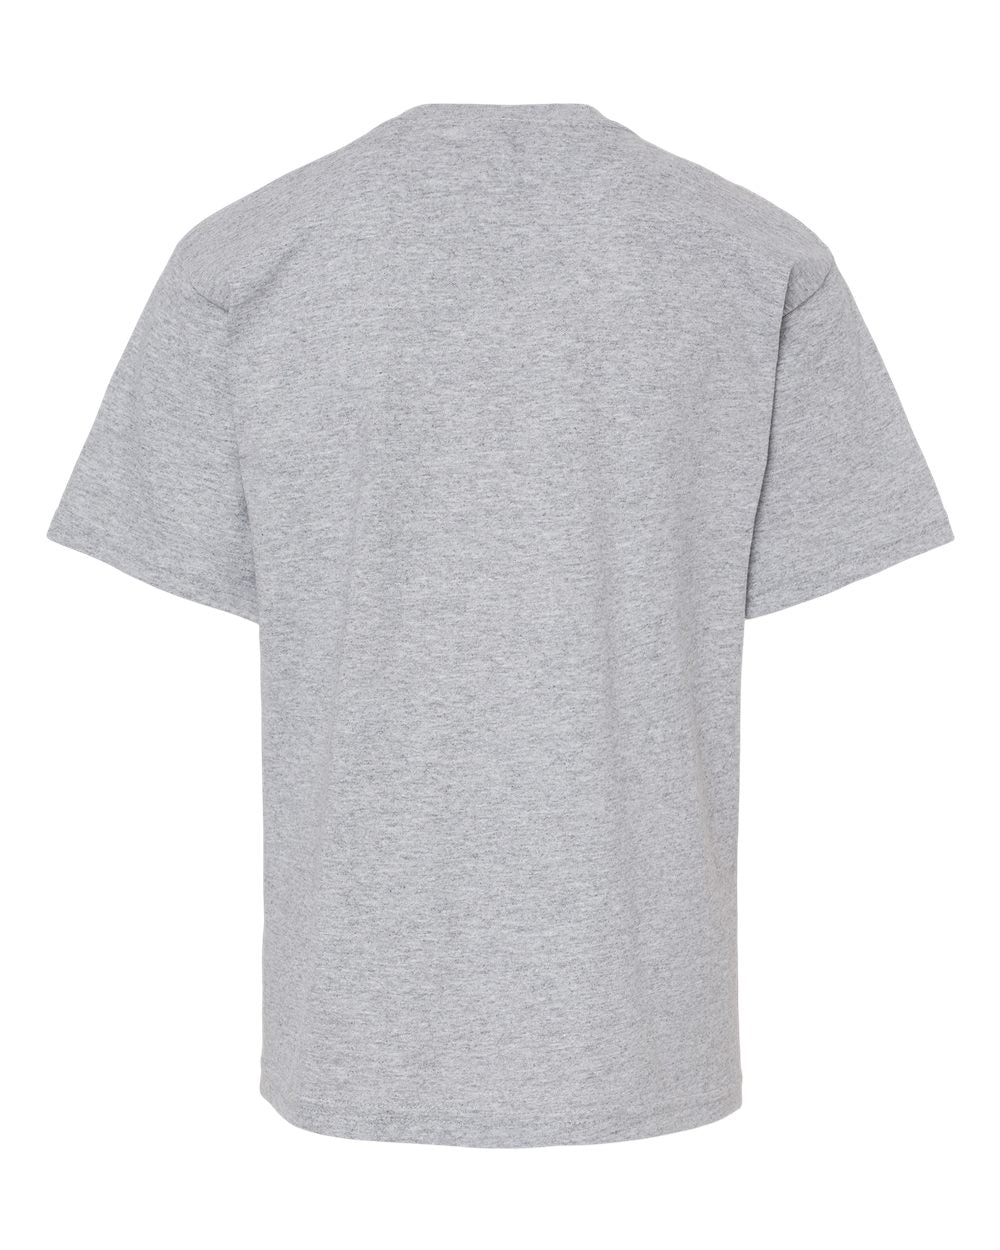 M&O Youth Gold Soft Touch T-Shirt 4850 #color_Sport Grey